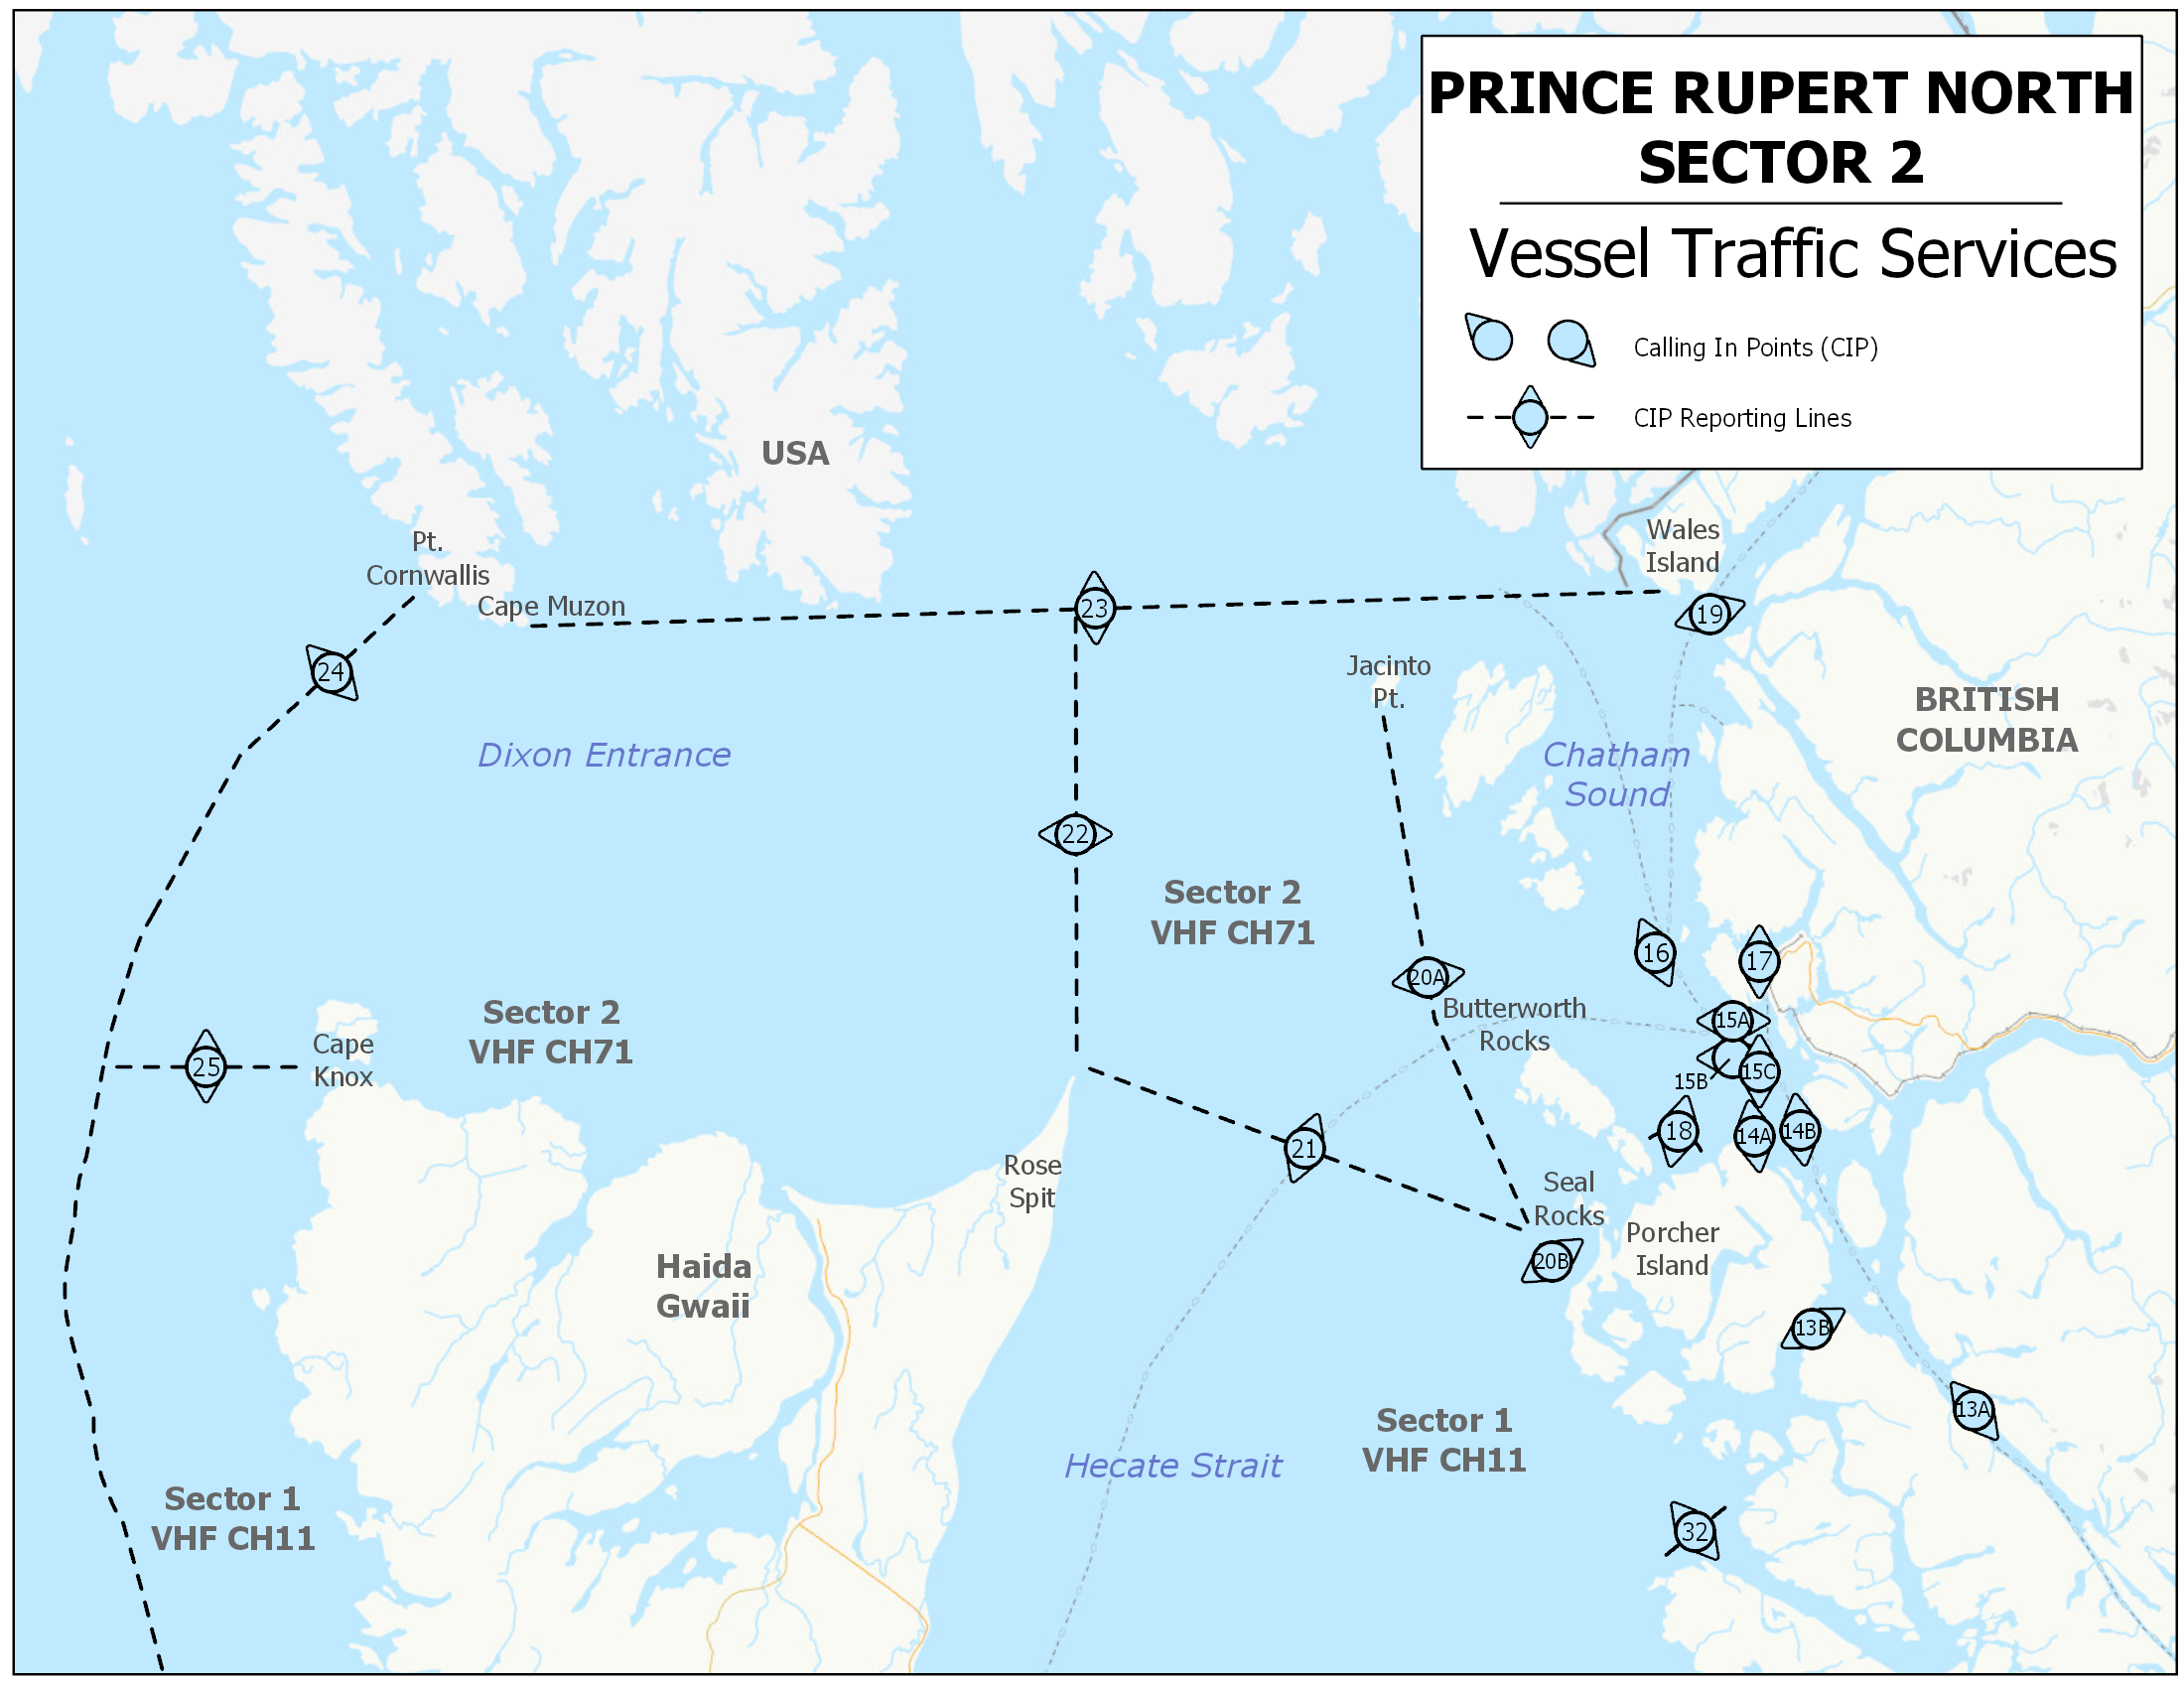 Prince Rupert - Vessel Traffic Services - Sector 2